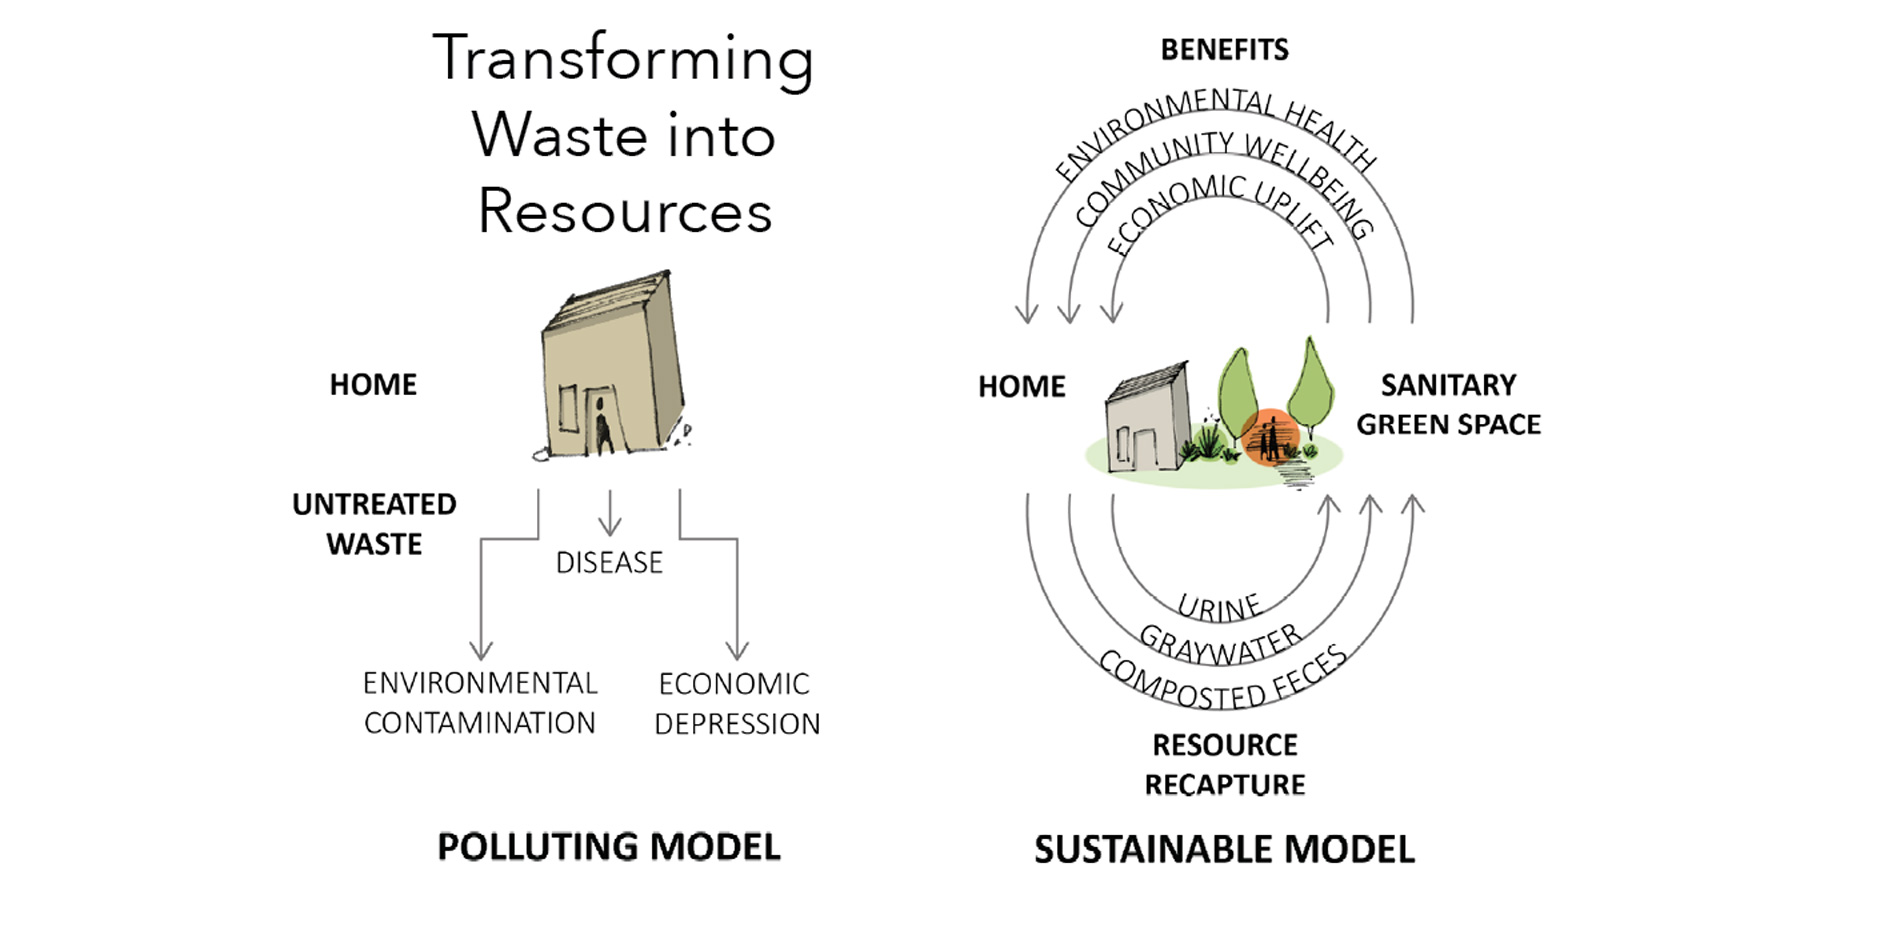 A new model: turning waste into resources